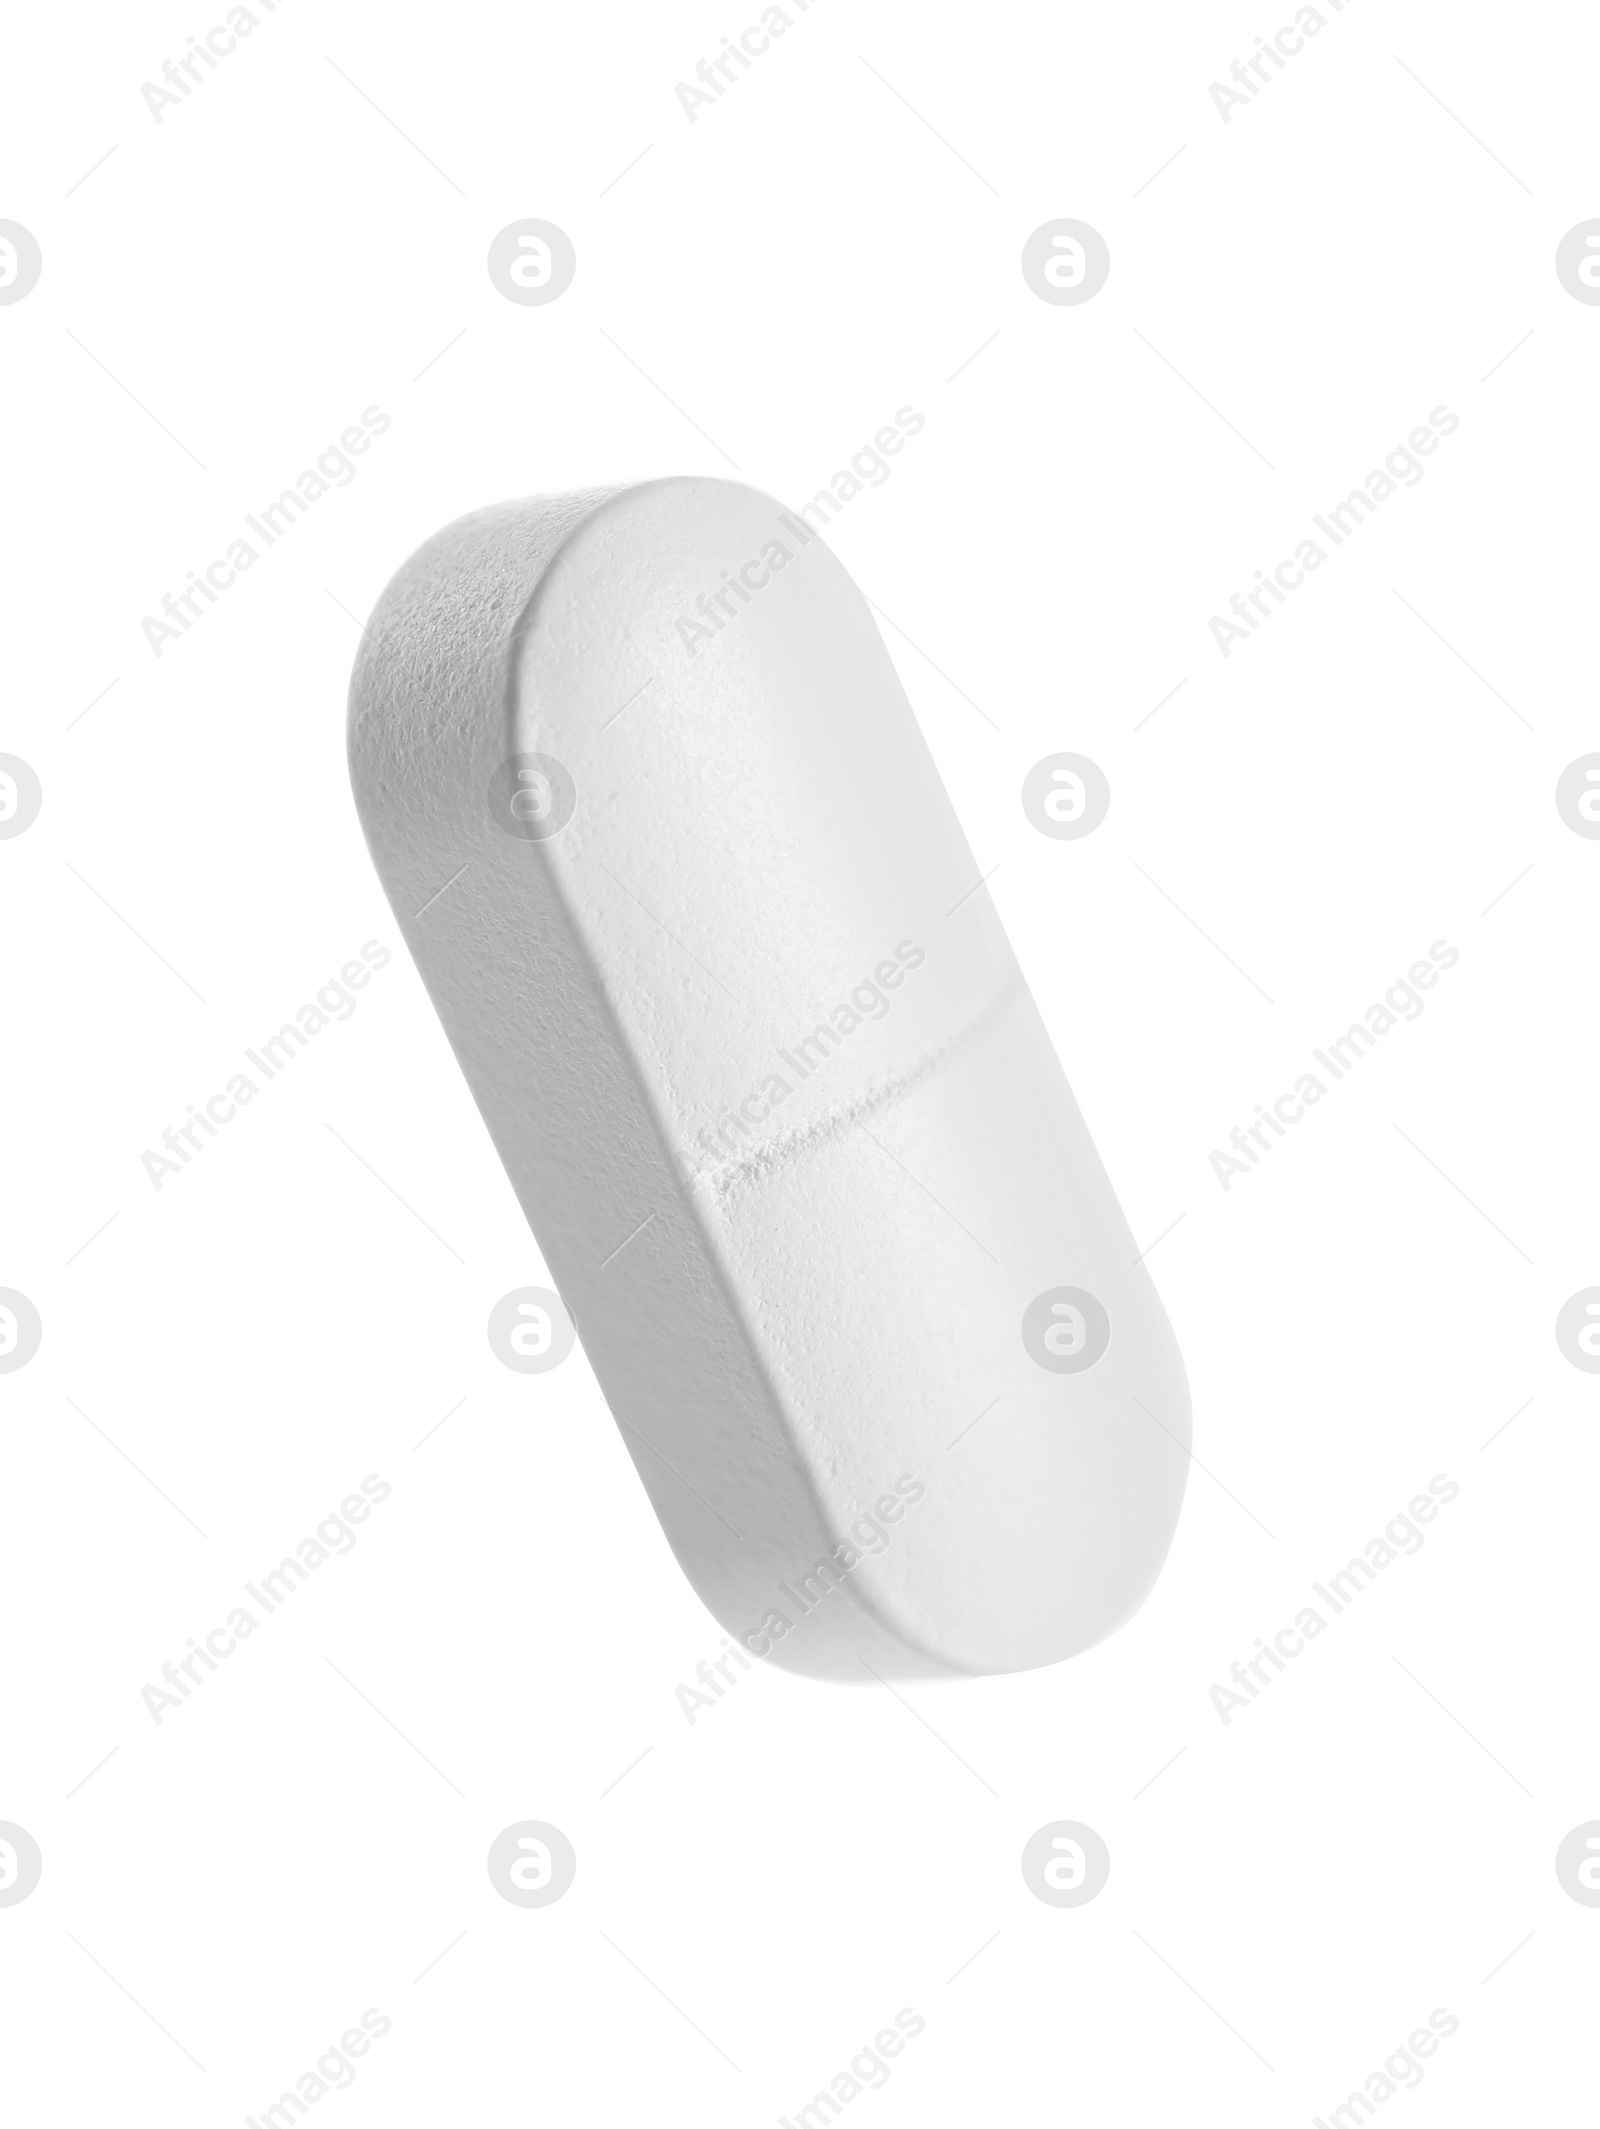 Photo of One pill isolated on white. Drug therapy